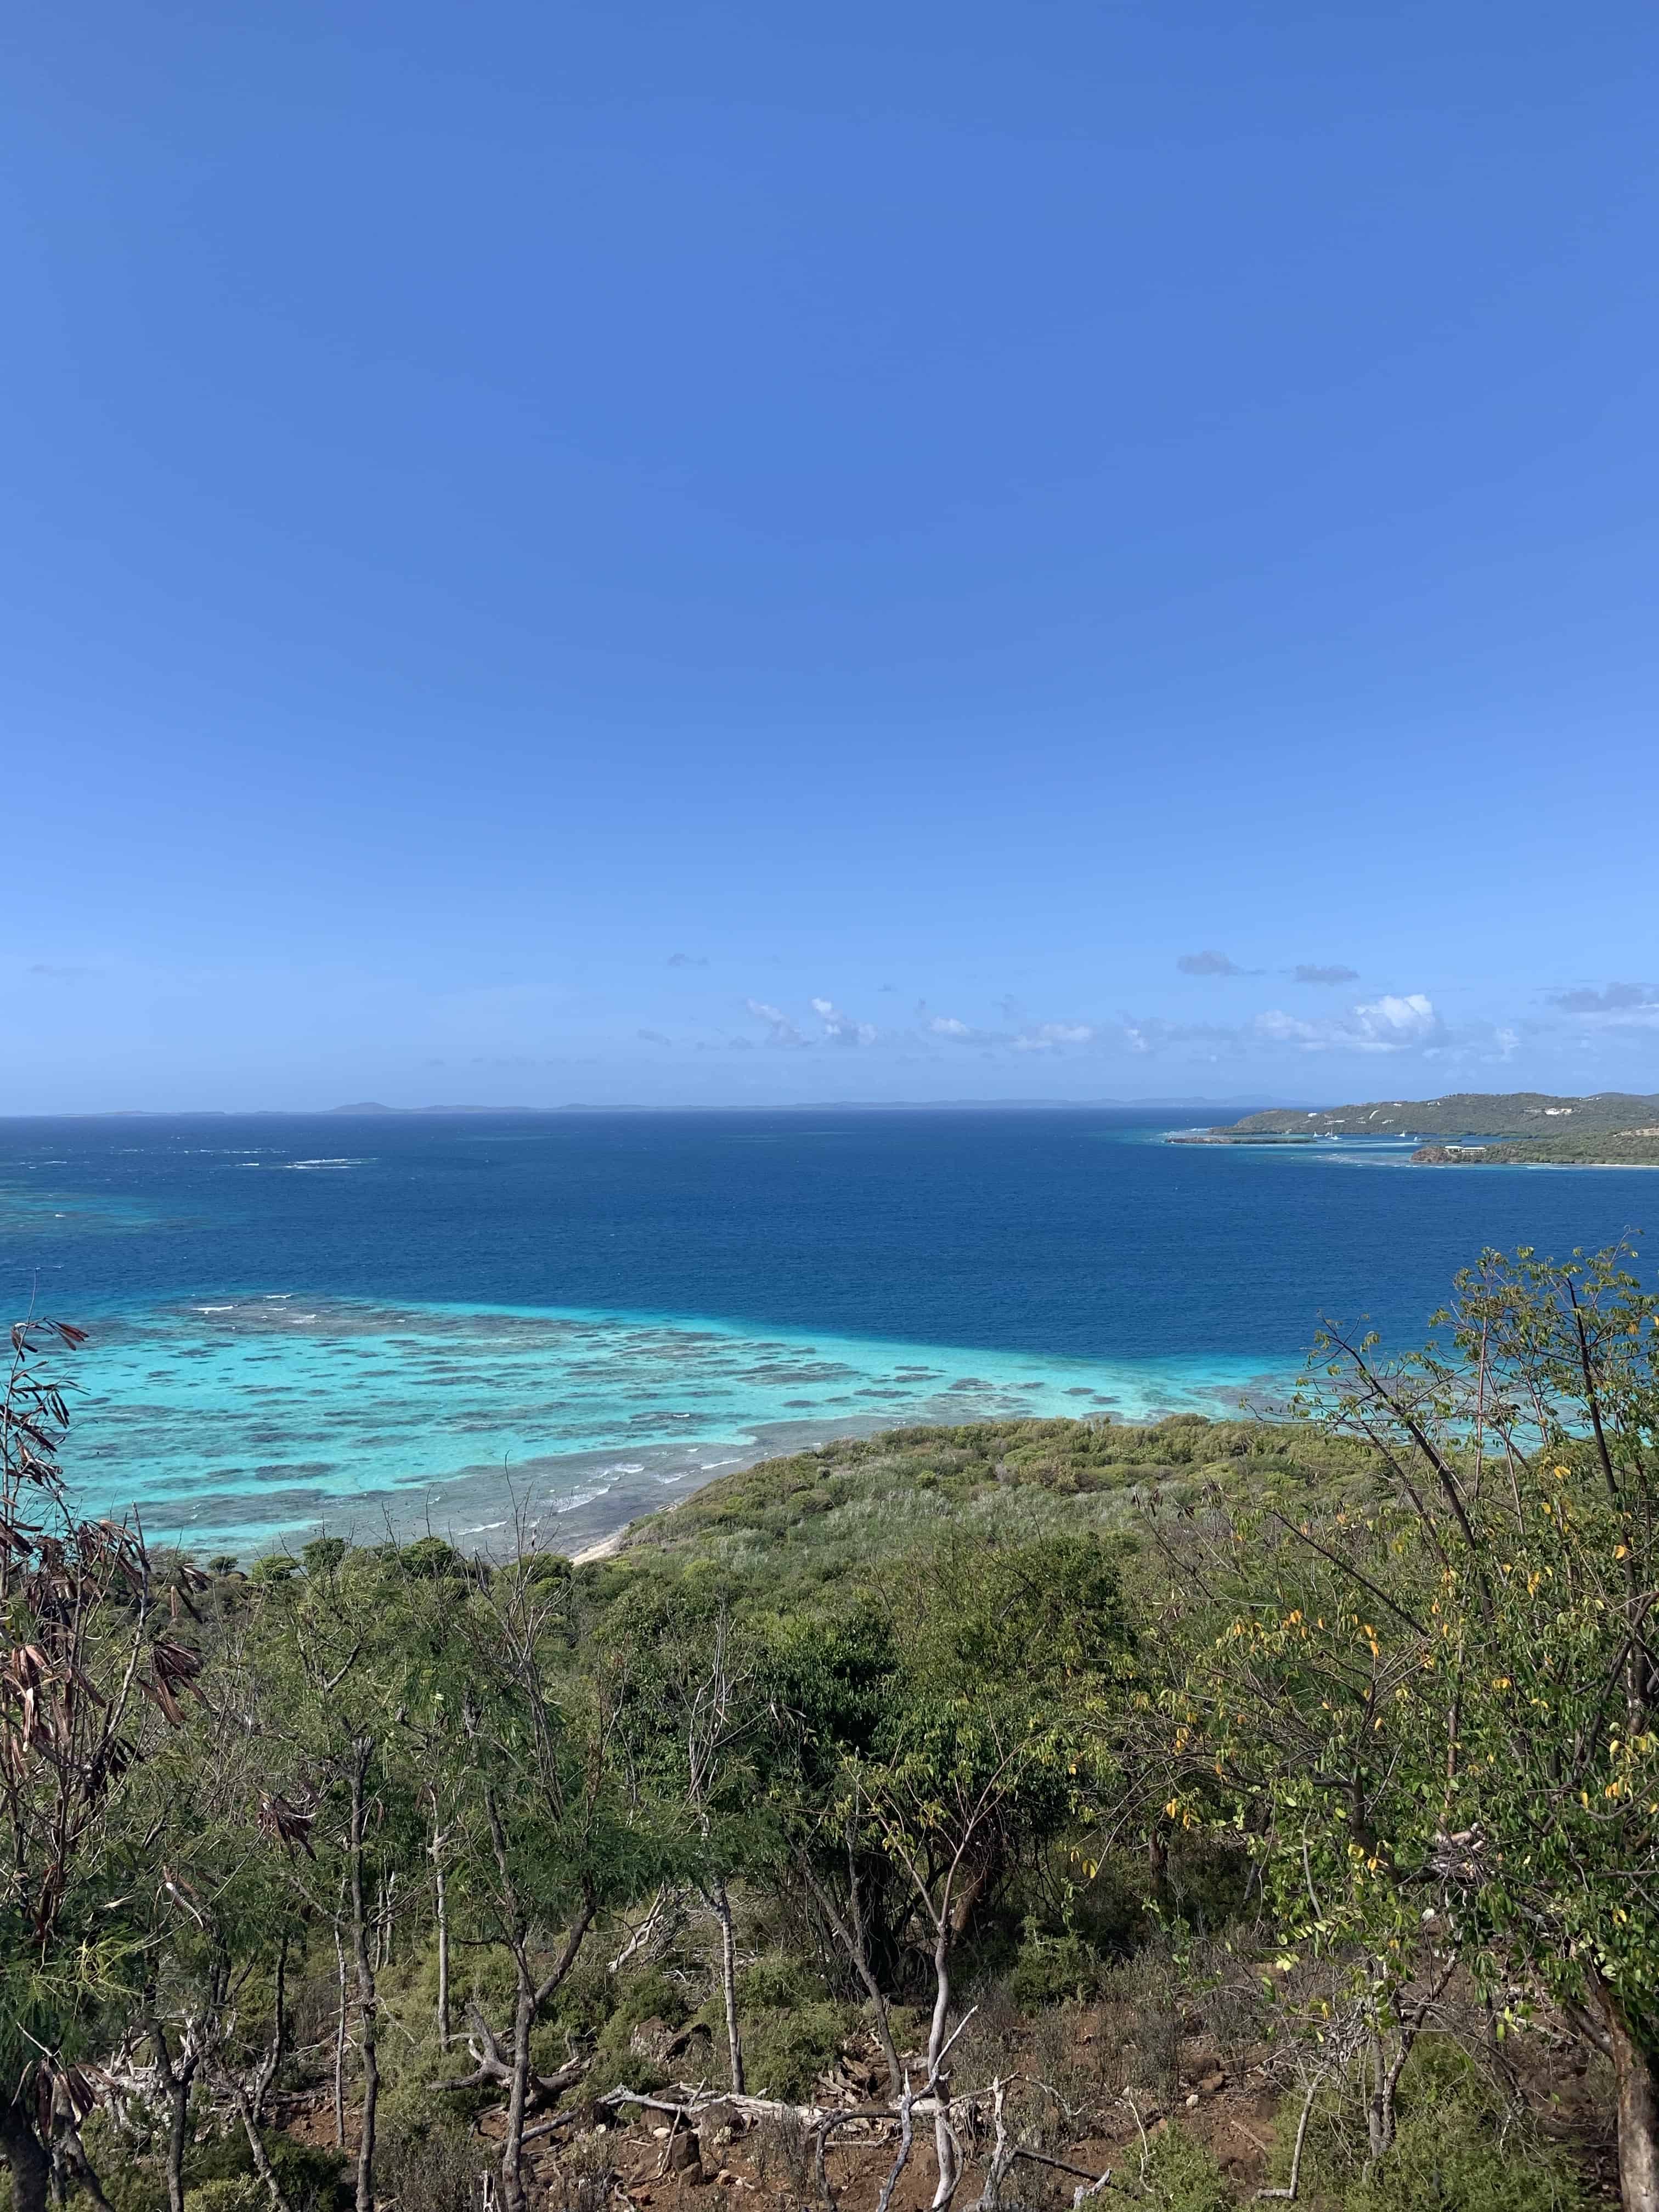 A view from the Light house, Culebrita, Puerto Rico